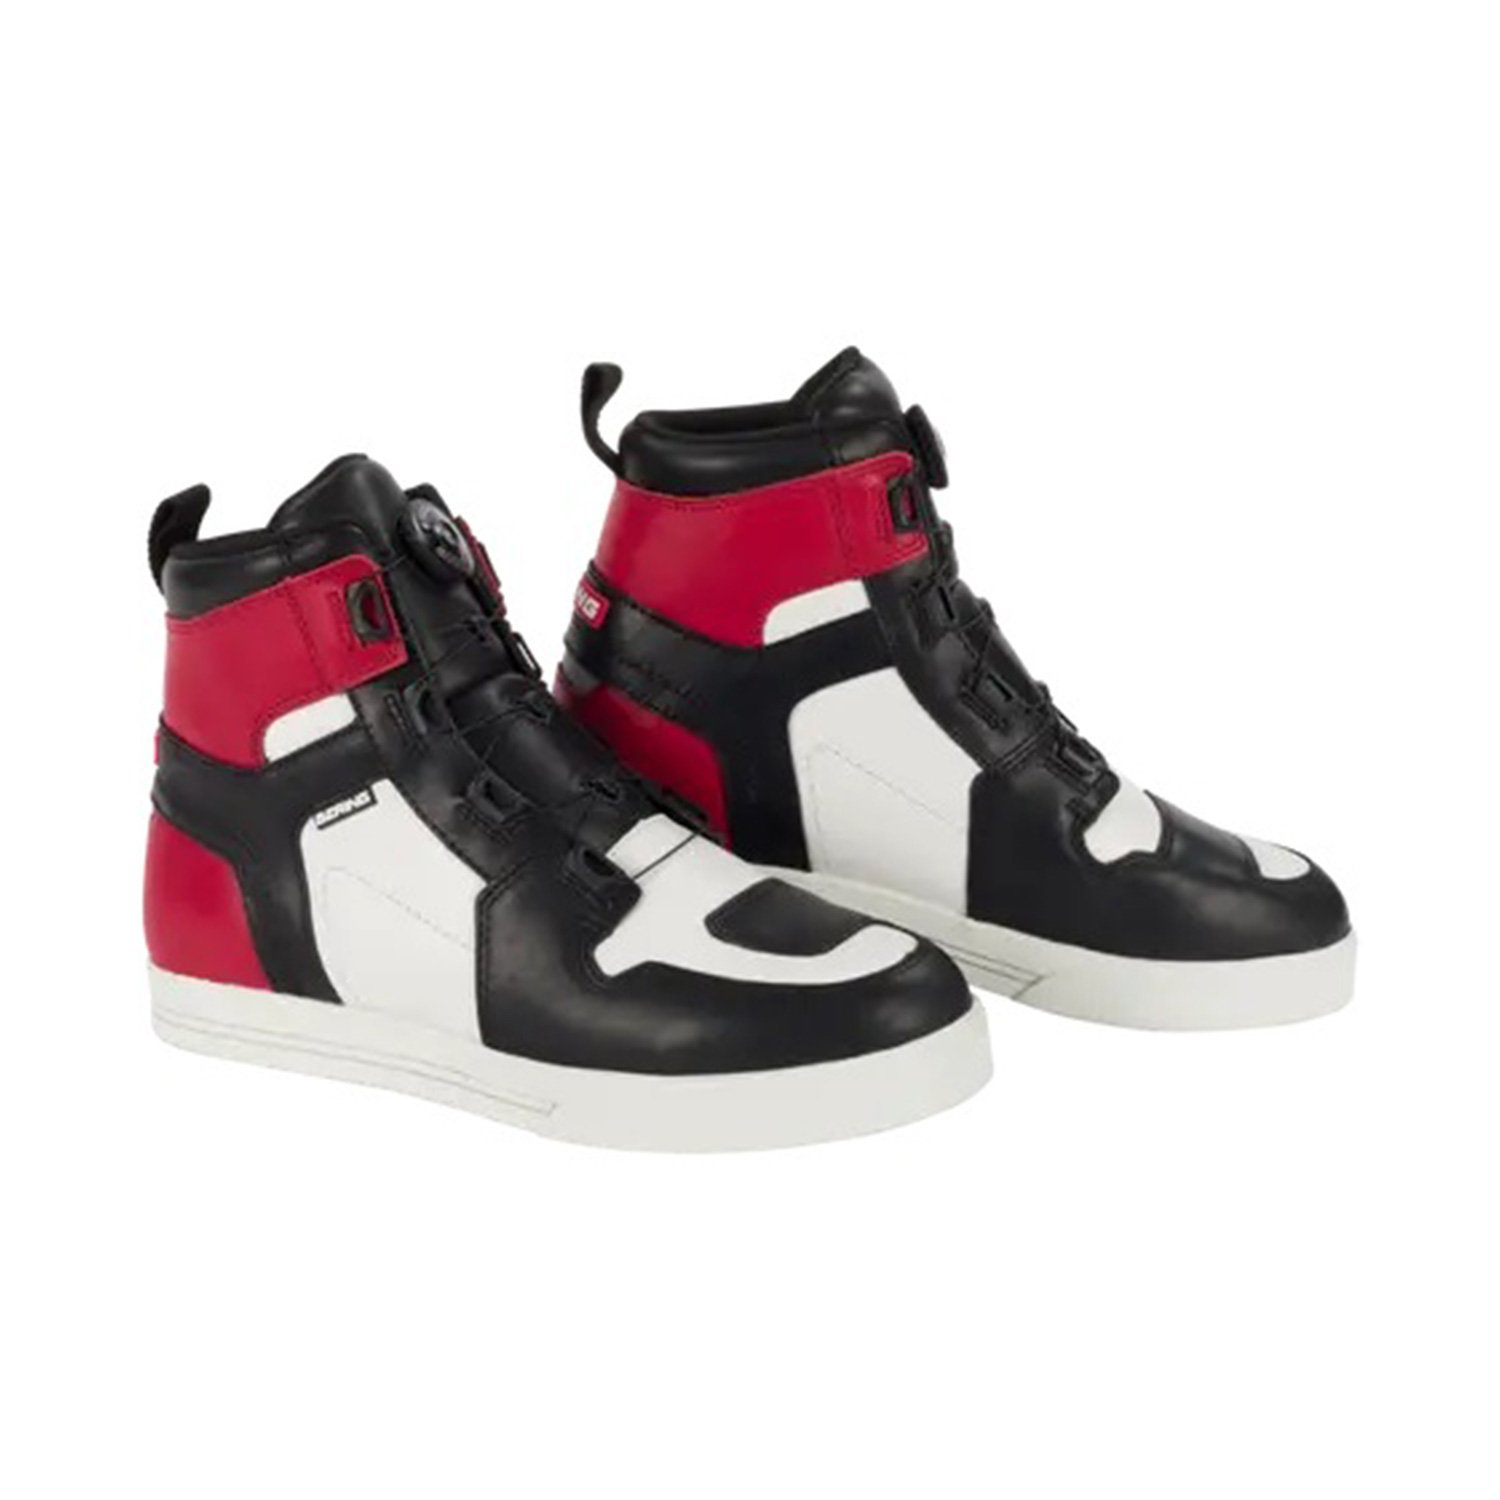 Image of Bering Sneakers Reflex A-Top Black White Red Size 40 ID 3660815176665